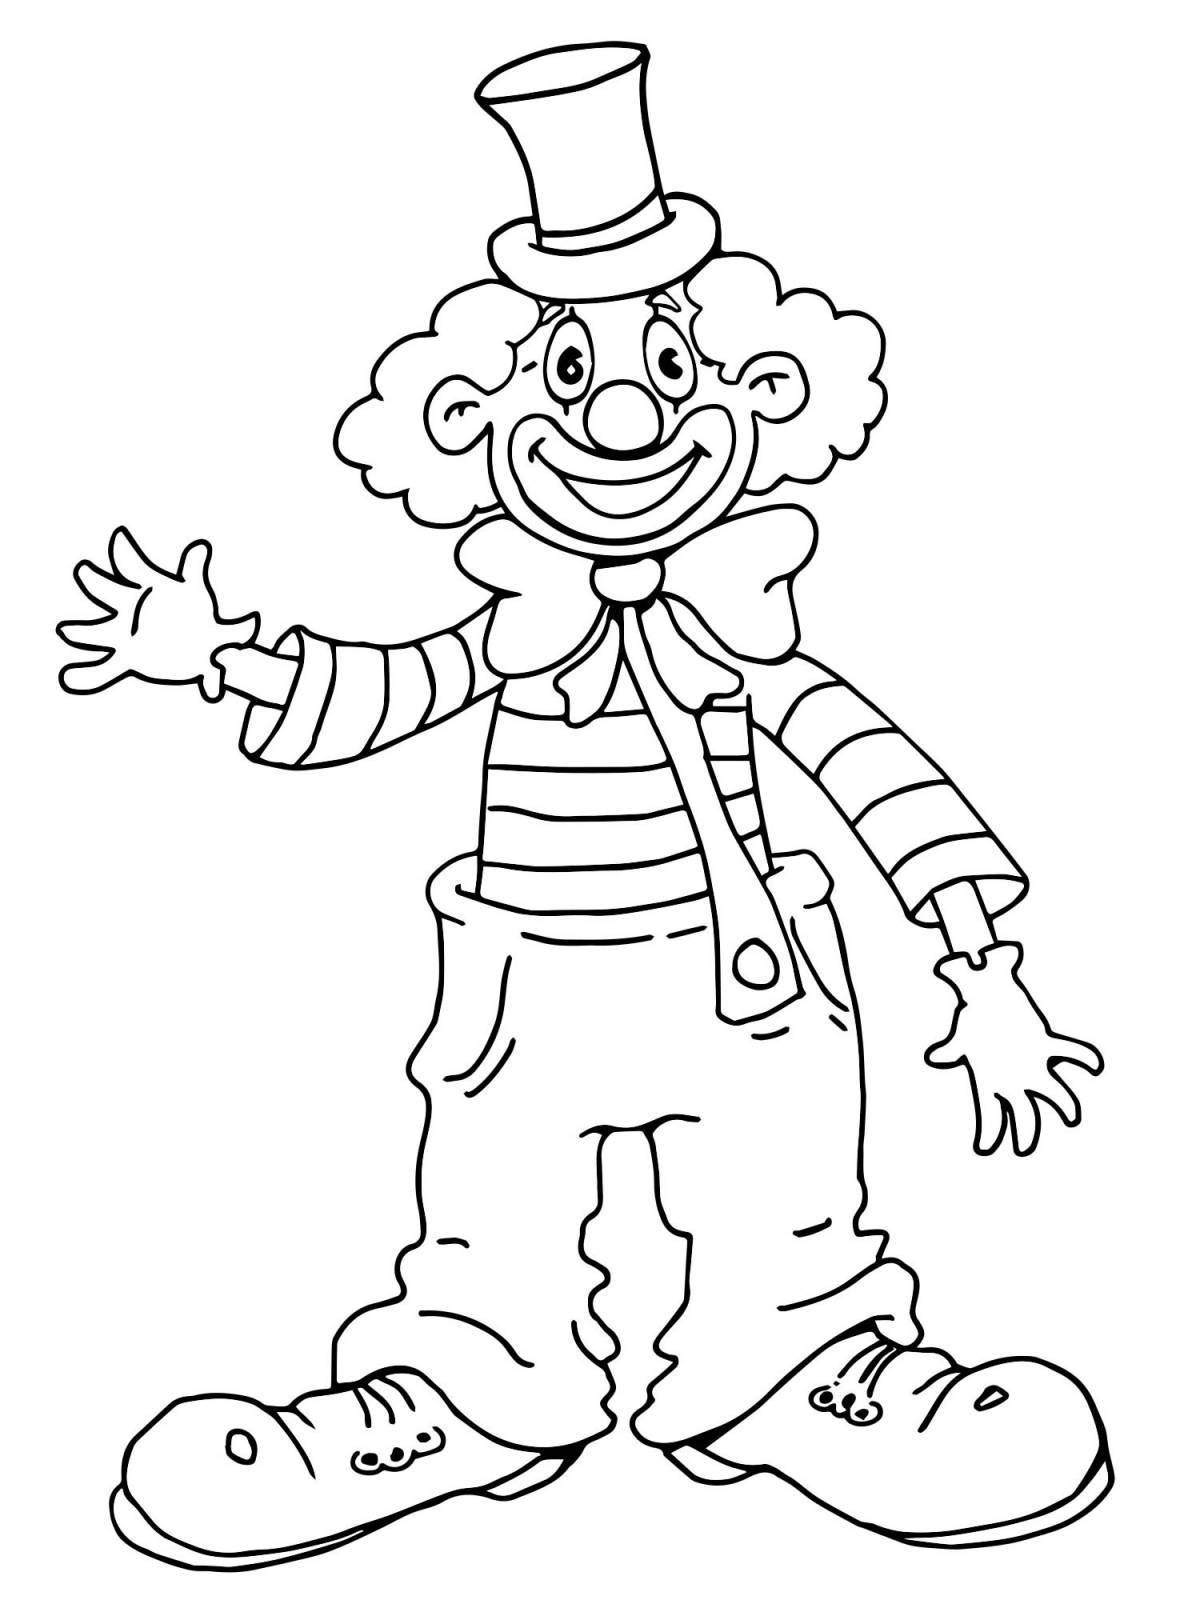 Colorful coloring funny clown